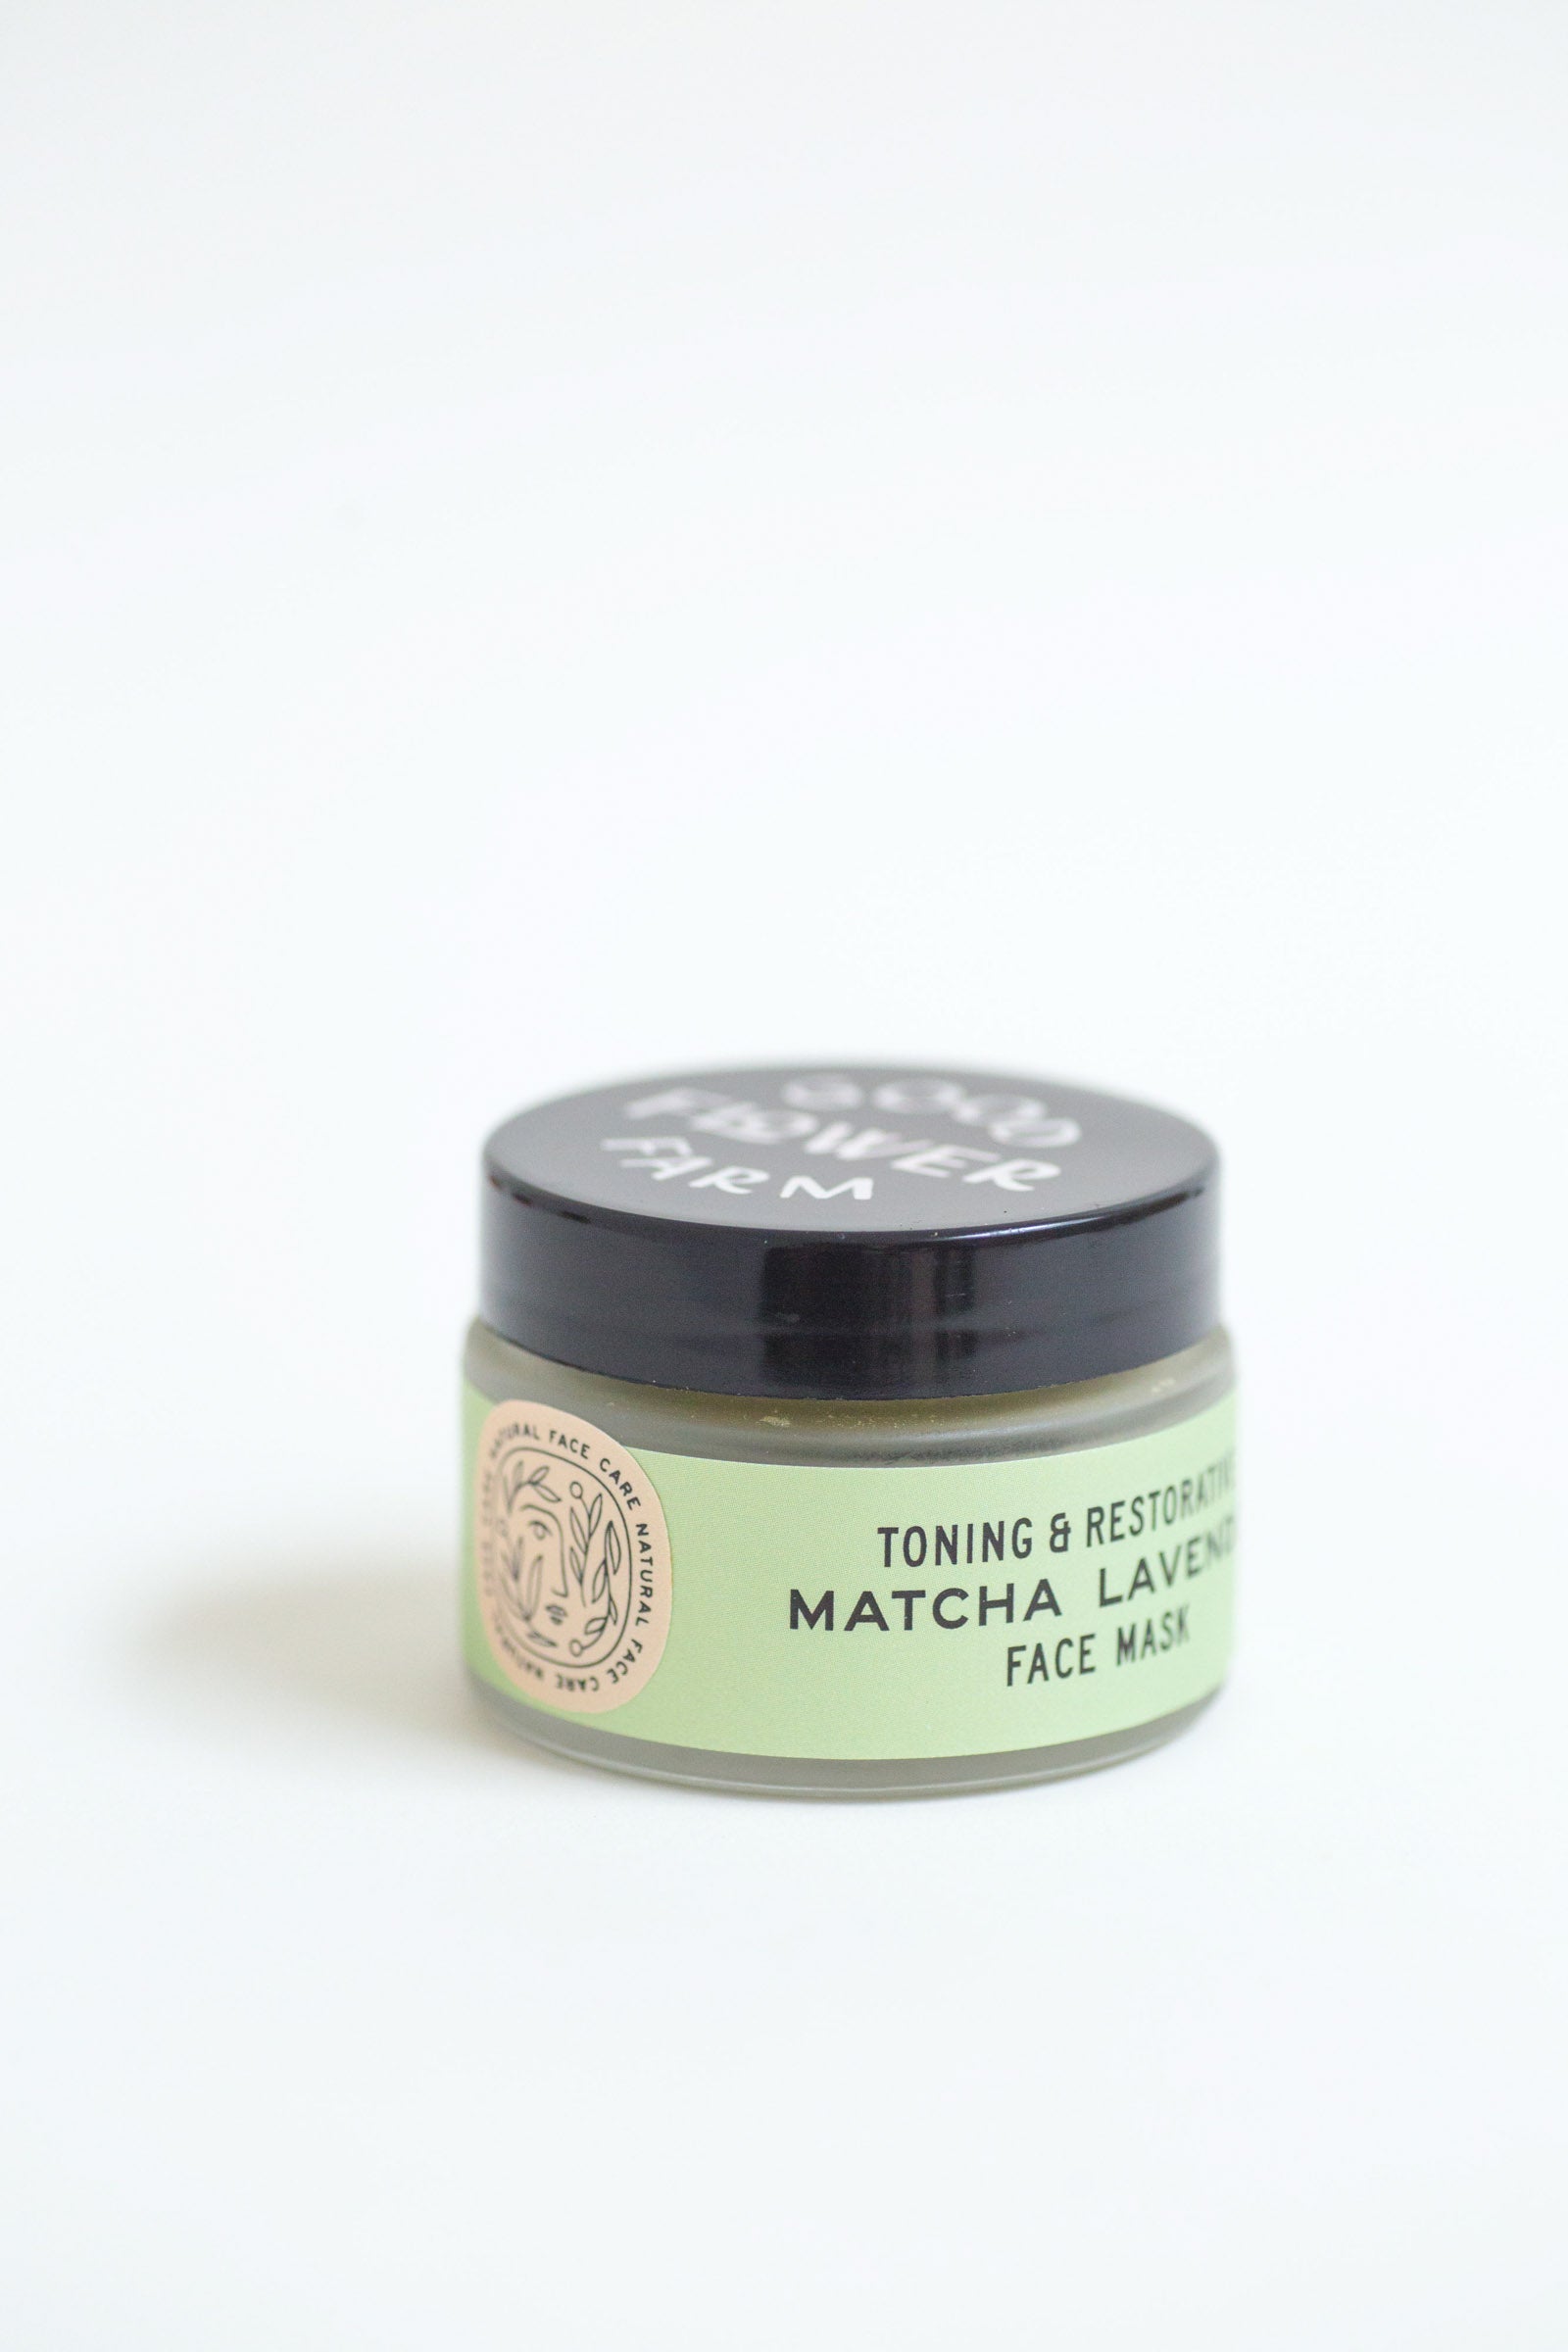 Organic herb and clay matcha lavender face mask by Good Flower Farm